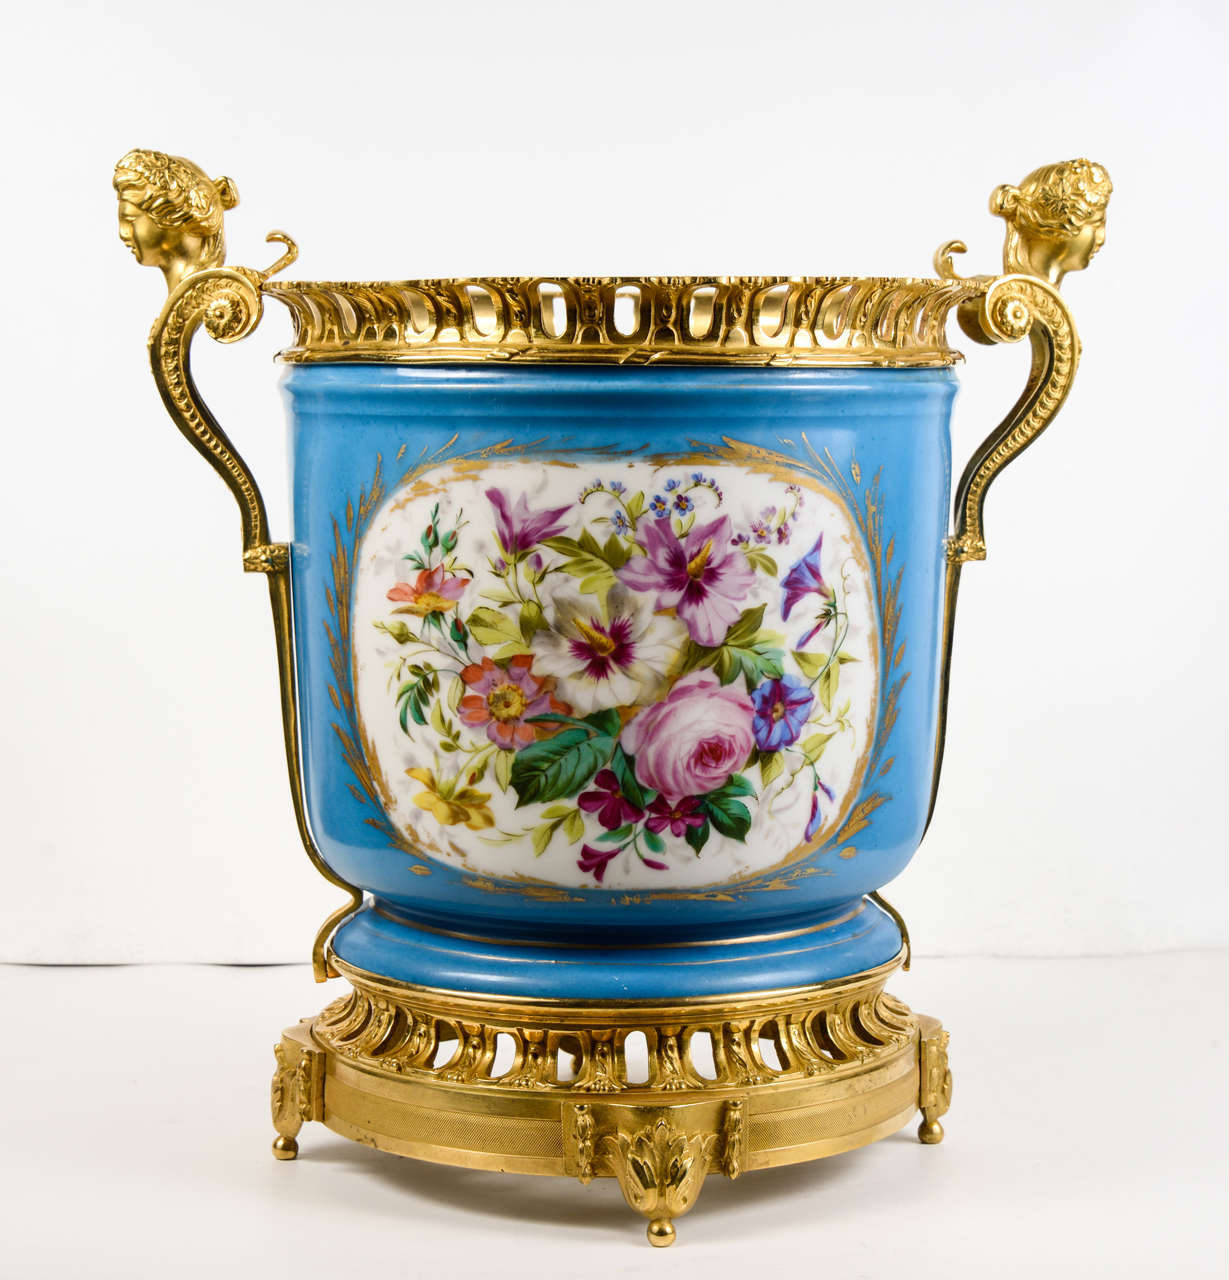 Blue vase, manufacture of Sèvre, on a gilded bronze base, with gilded bronze handles 
flowers painted on one face, and spring scène on the other face.